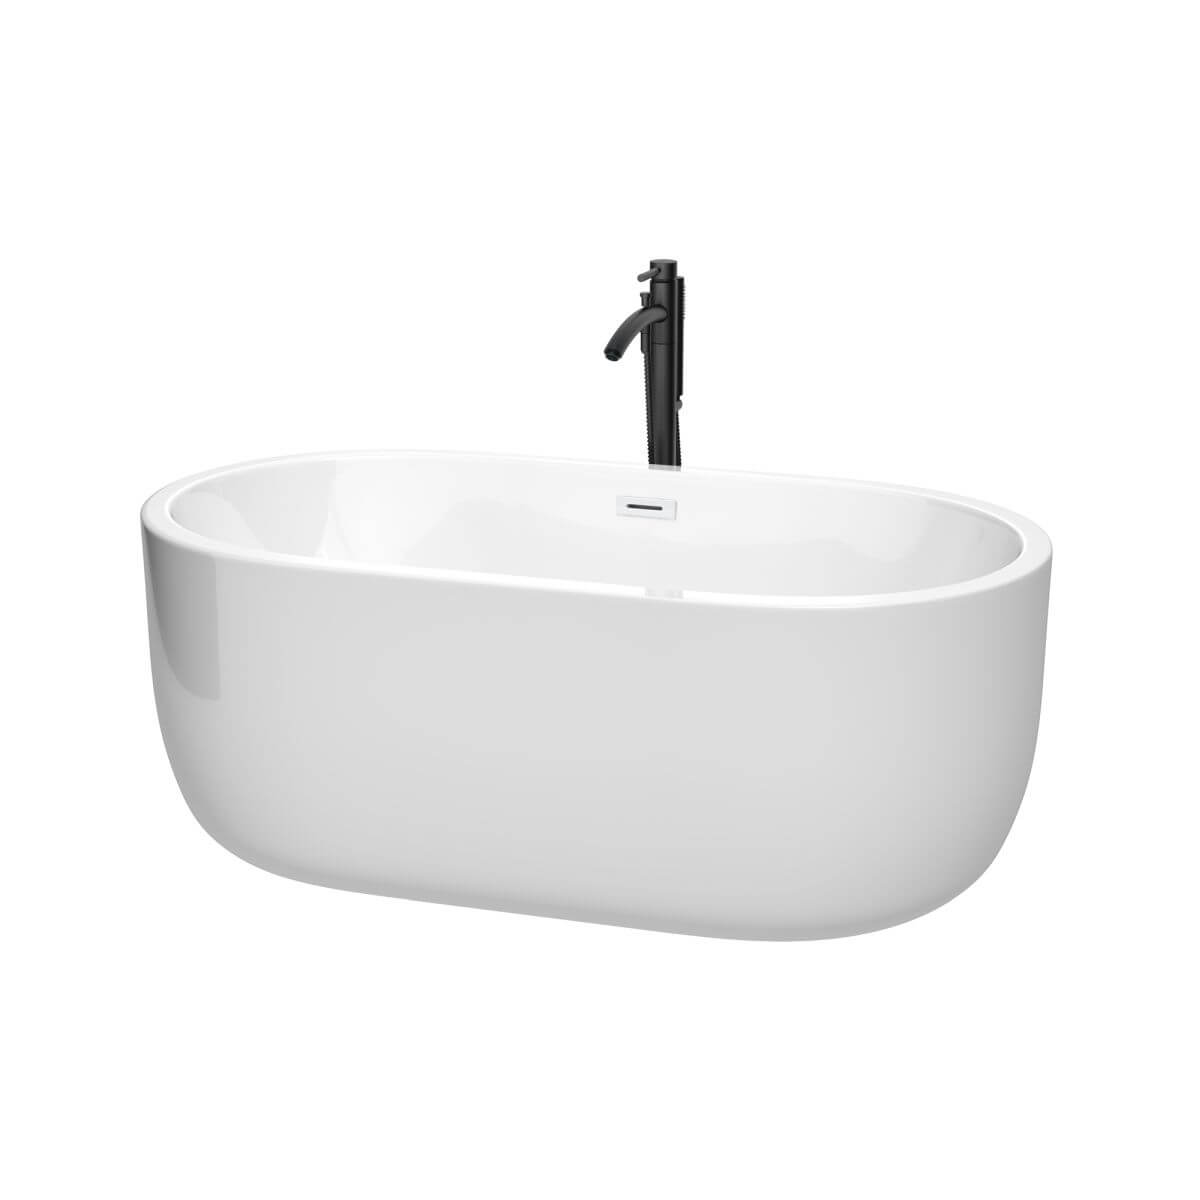 Wyndham Collection Juliette 60 inch Freestanding Bathtub in White with Shiny White Trim and Floor Mounted Faucet in Matte Black - WCOBT101360SWATPBK